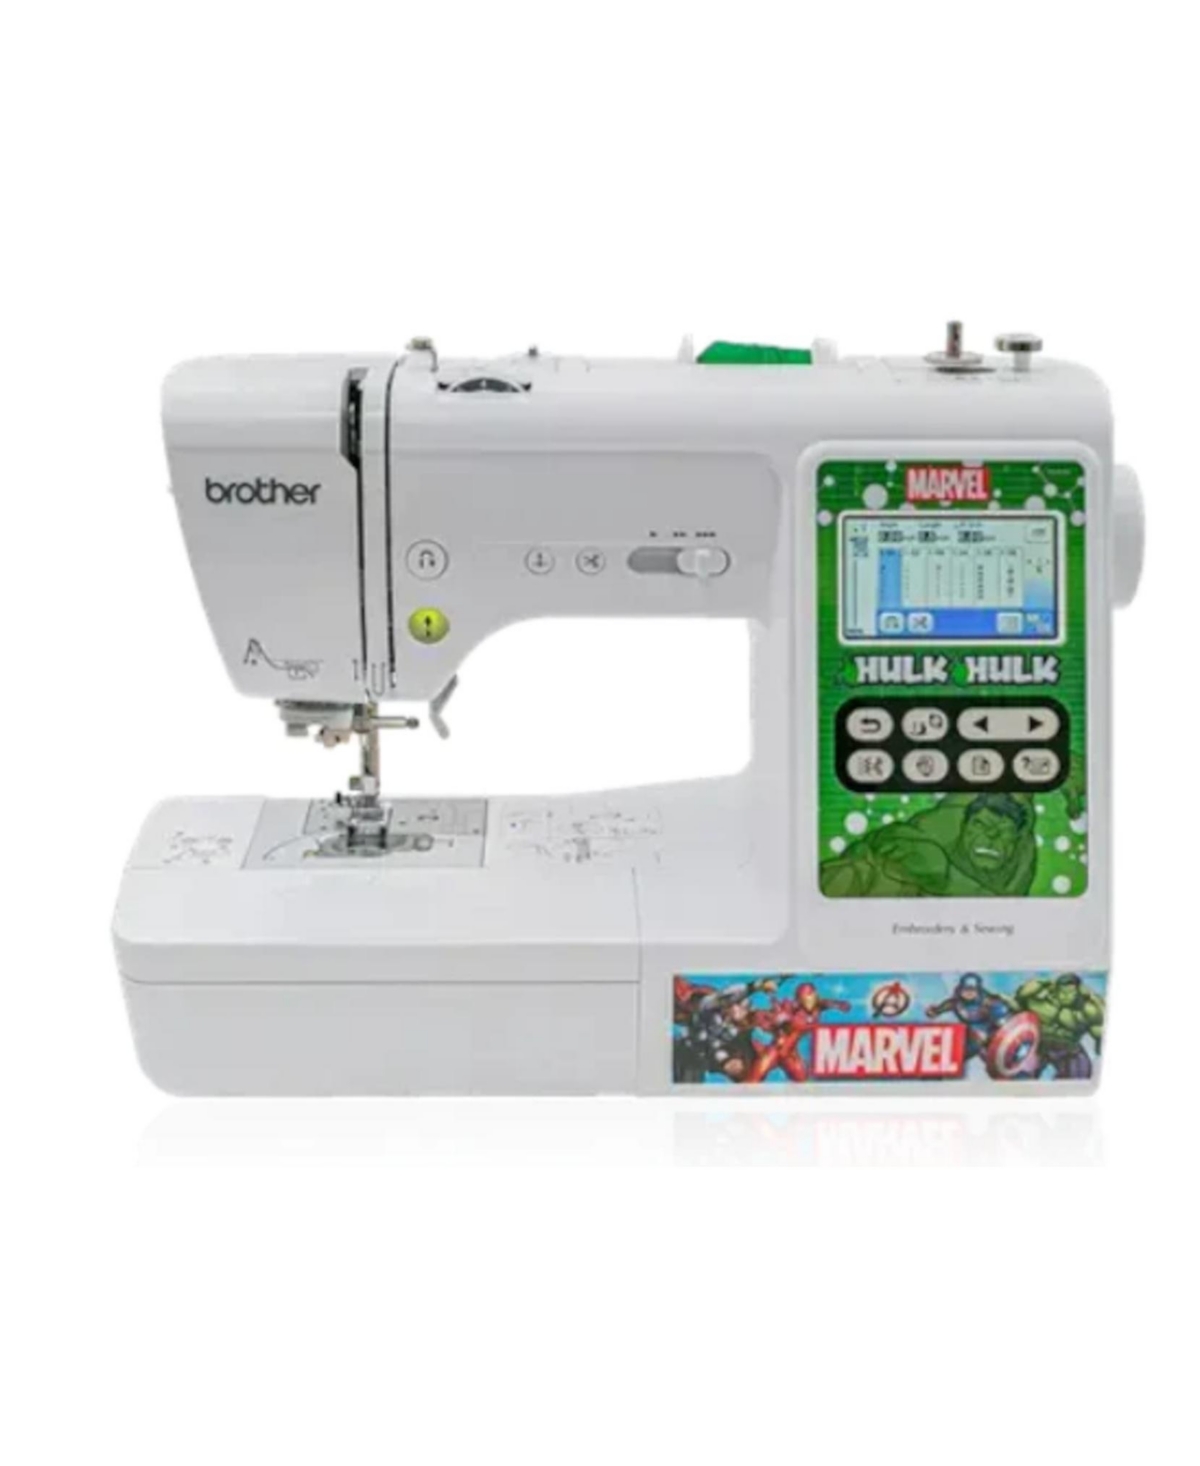 LB5500M Marvel Sewing and Embroidery Machine 4x4 - White